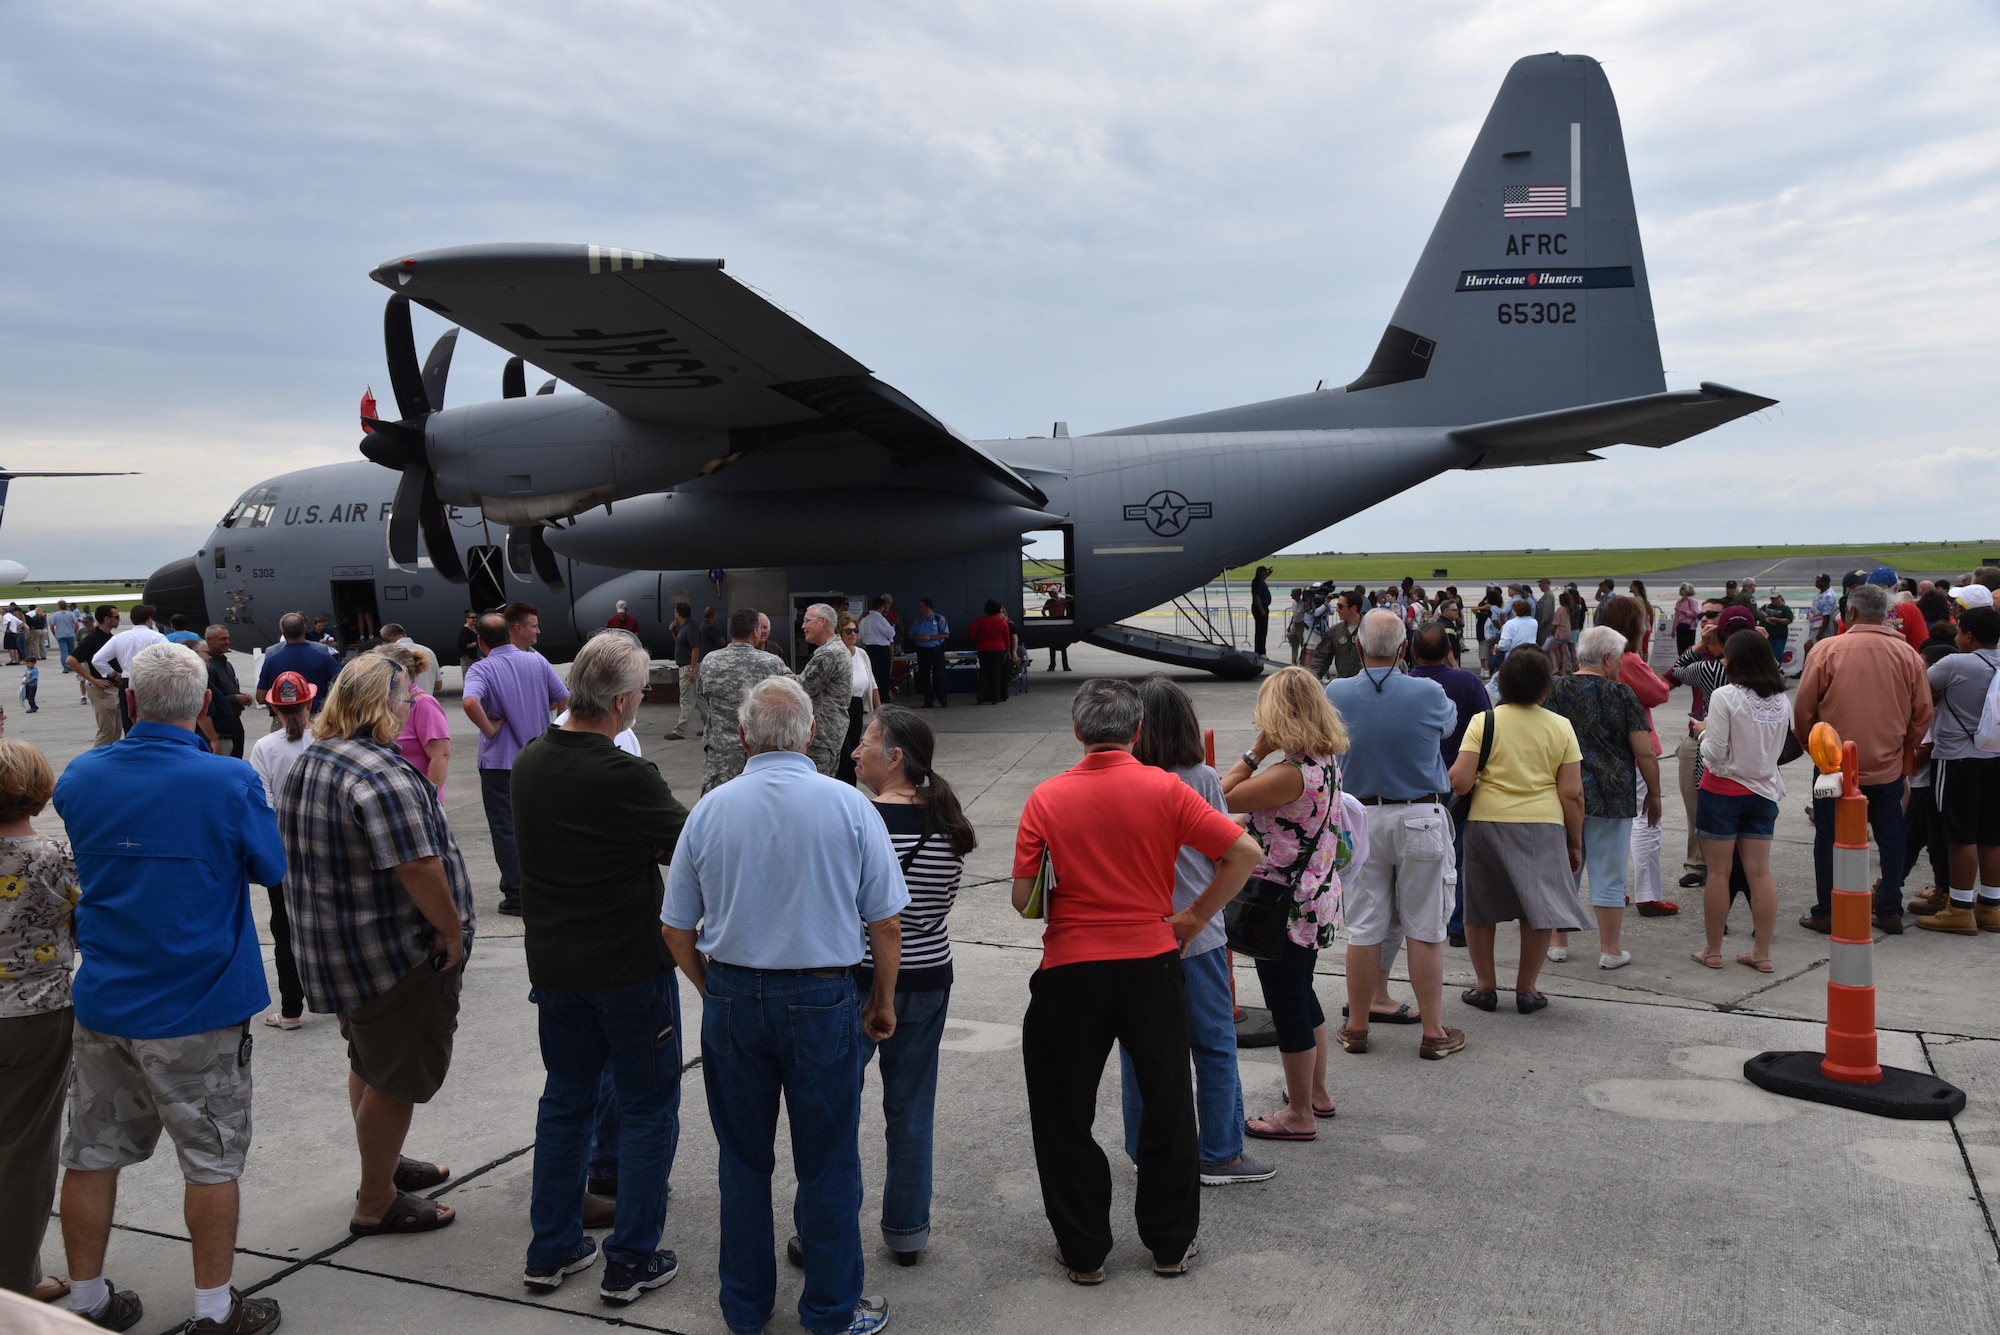 The New Orleans public lines up at the Lakefront Airport May 18, 2016, to tour the WC-130J Super Hercules Aircraft used by the 53rd Weather Reconnaissance Squadron to collect weather data for the National Hurricane Center used to improve their forecasts. An Air Force Reserve Hurricane Hunter aircrew and a team of National Oceanic and Atmospheric Administration hurricane experts visited five Gulf Coast cities as part of the Hurricane Awareness Tour May 16-20, 2016. The tour is a joint effort between NOAA's National Weather Service and National Hurricane Center and the 403rd Wing's 53rd Weather Reconnaissance Squadron to promote awareness about the destructive forces of hurricanes and how people can prepare. (U.S. Air Force photo/Maj. Marnee A.C. Losurdo)